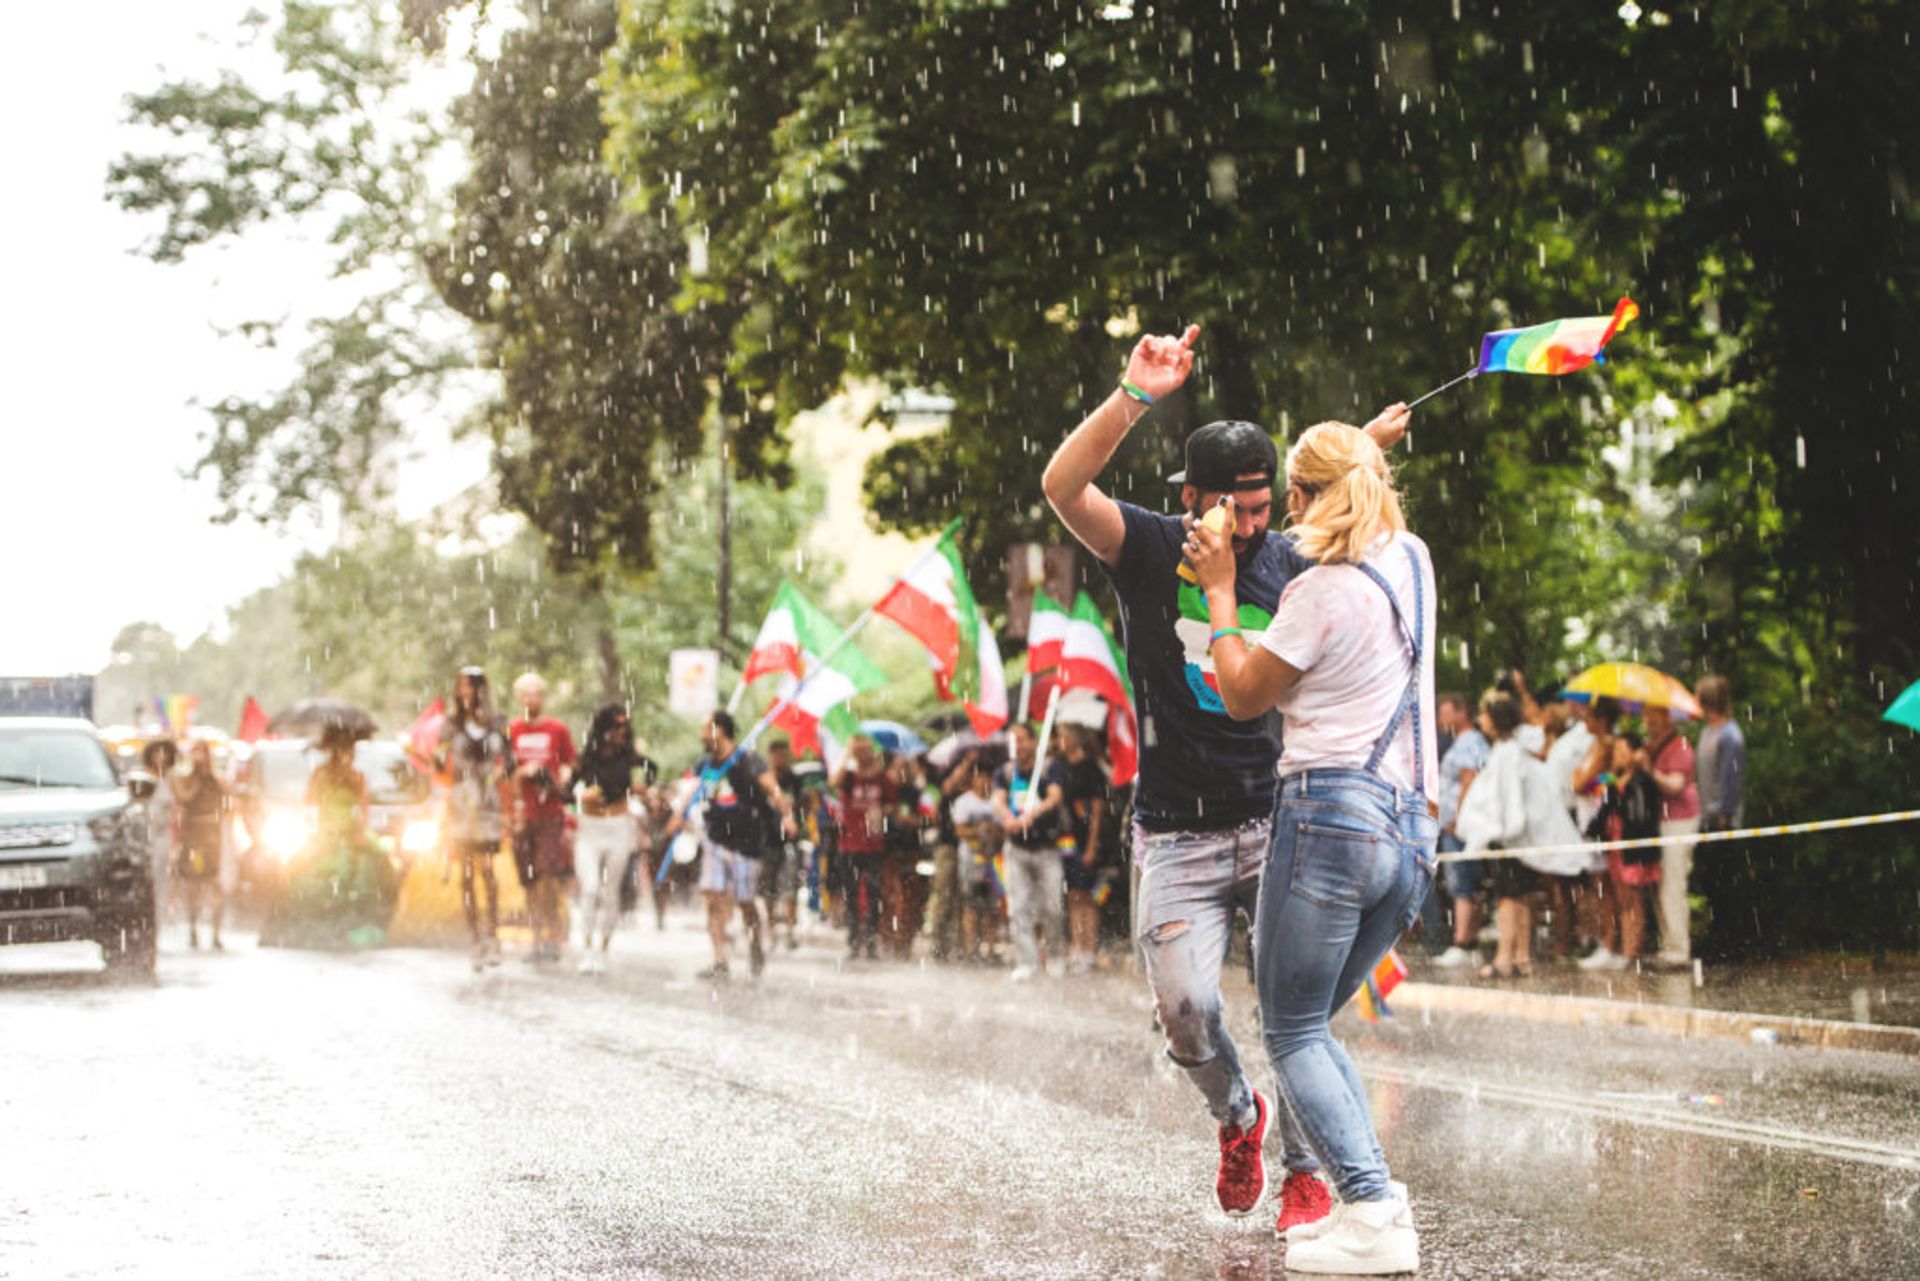 Two people in a street waving flags and dancing.